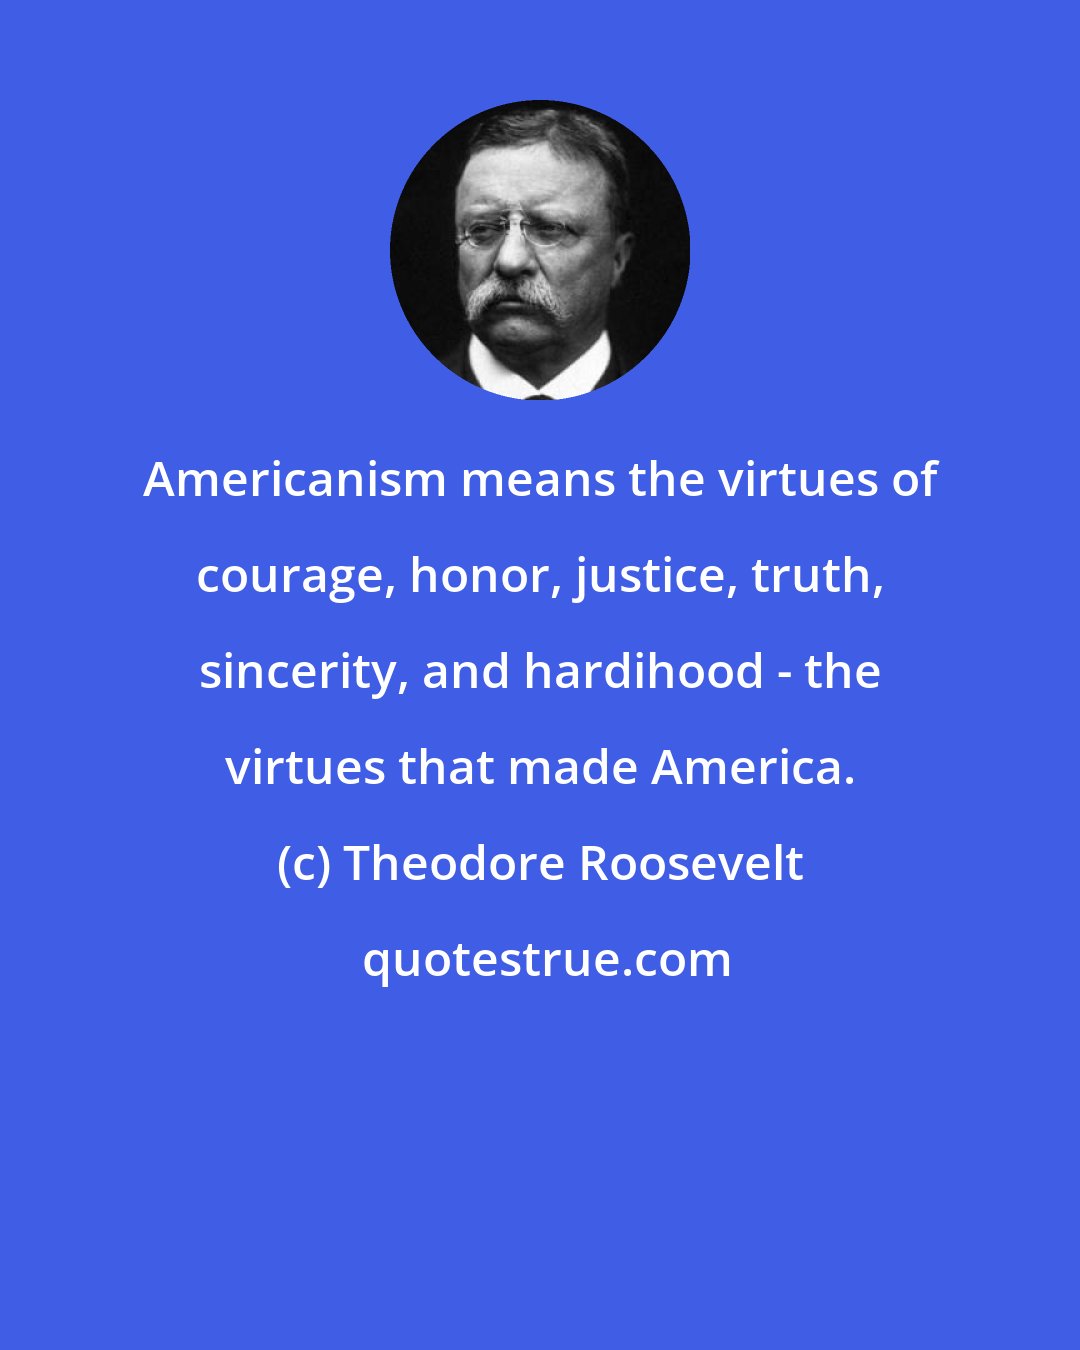 Theodore Roosevelt: Americanism means the virtues of courage, honor, justice, truth, sincerity, and hardihood - the virtues that made America.